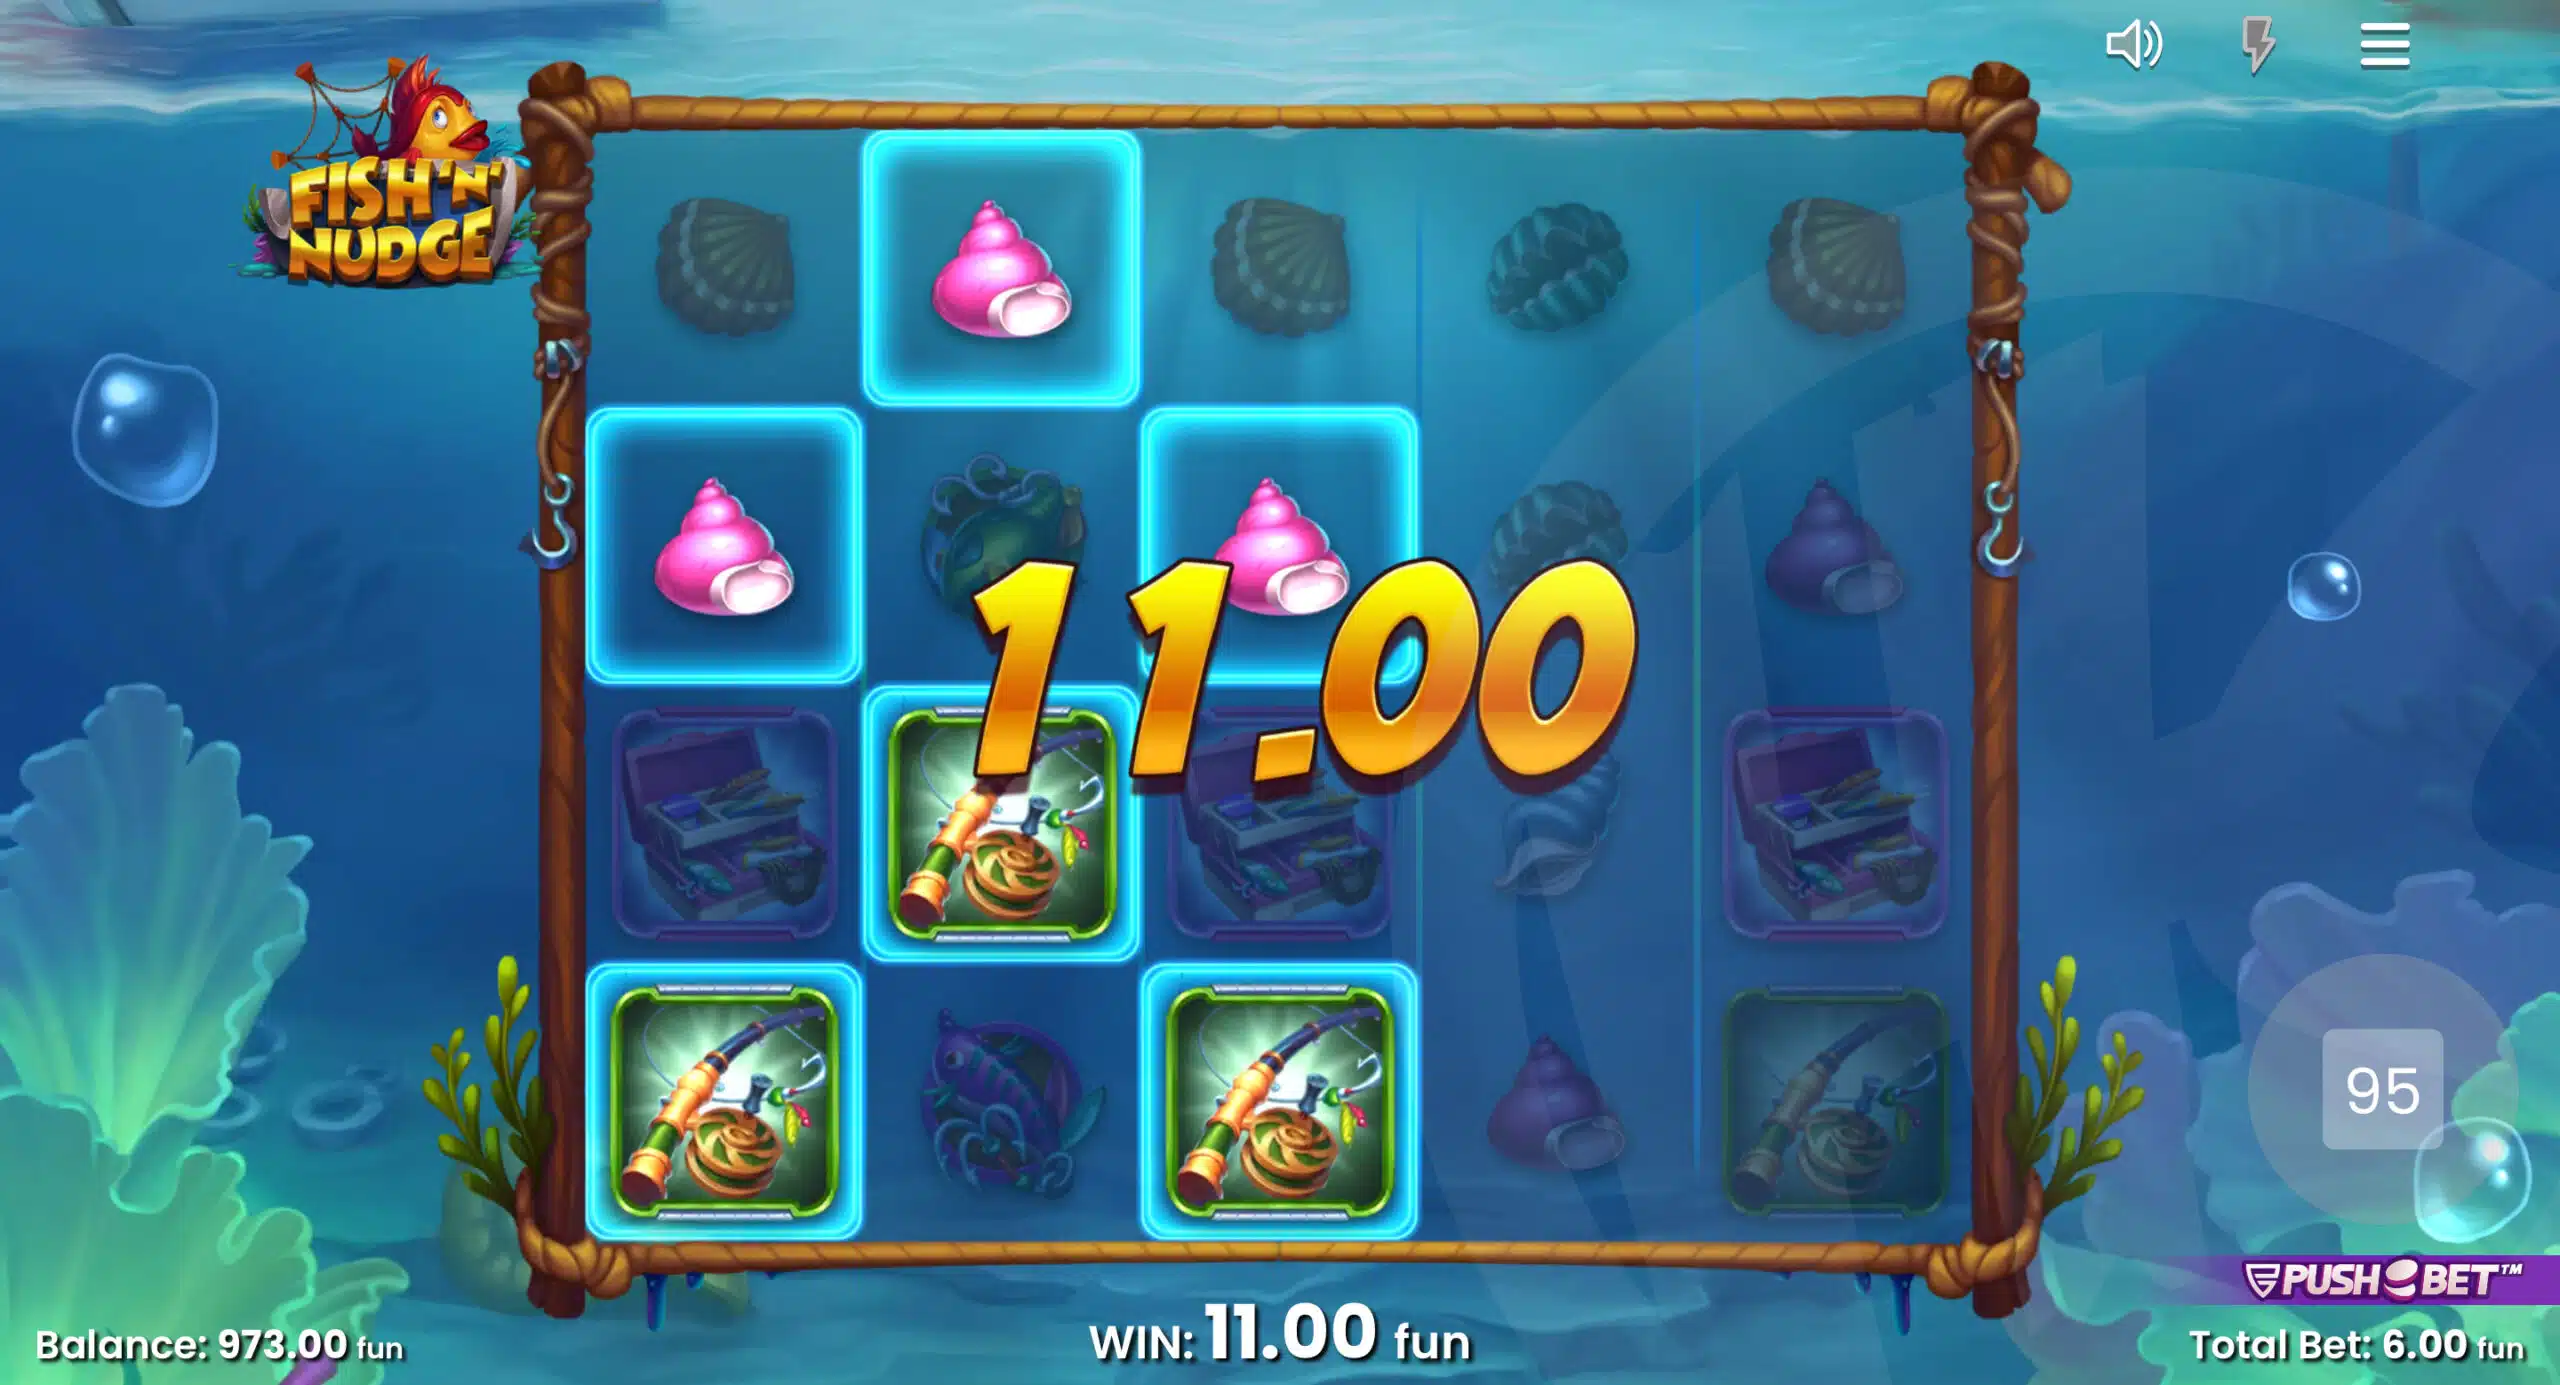 Fish 'n' Nudge Offers Players 20 Fixed Lines